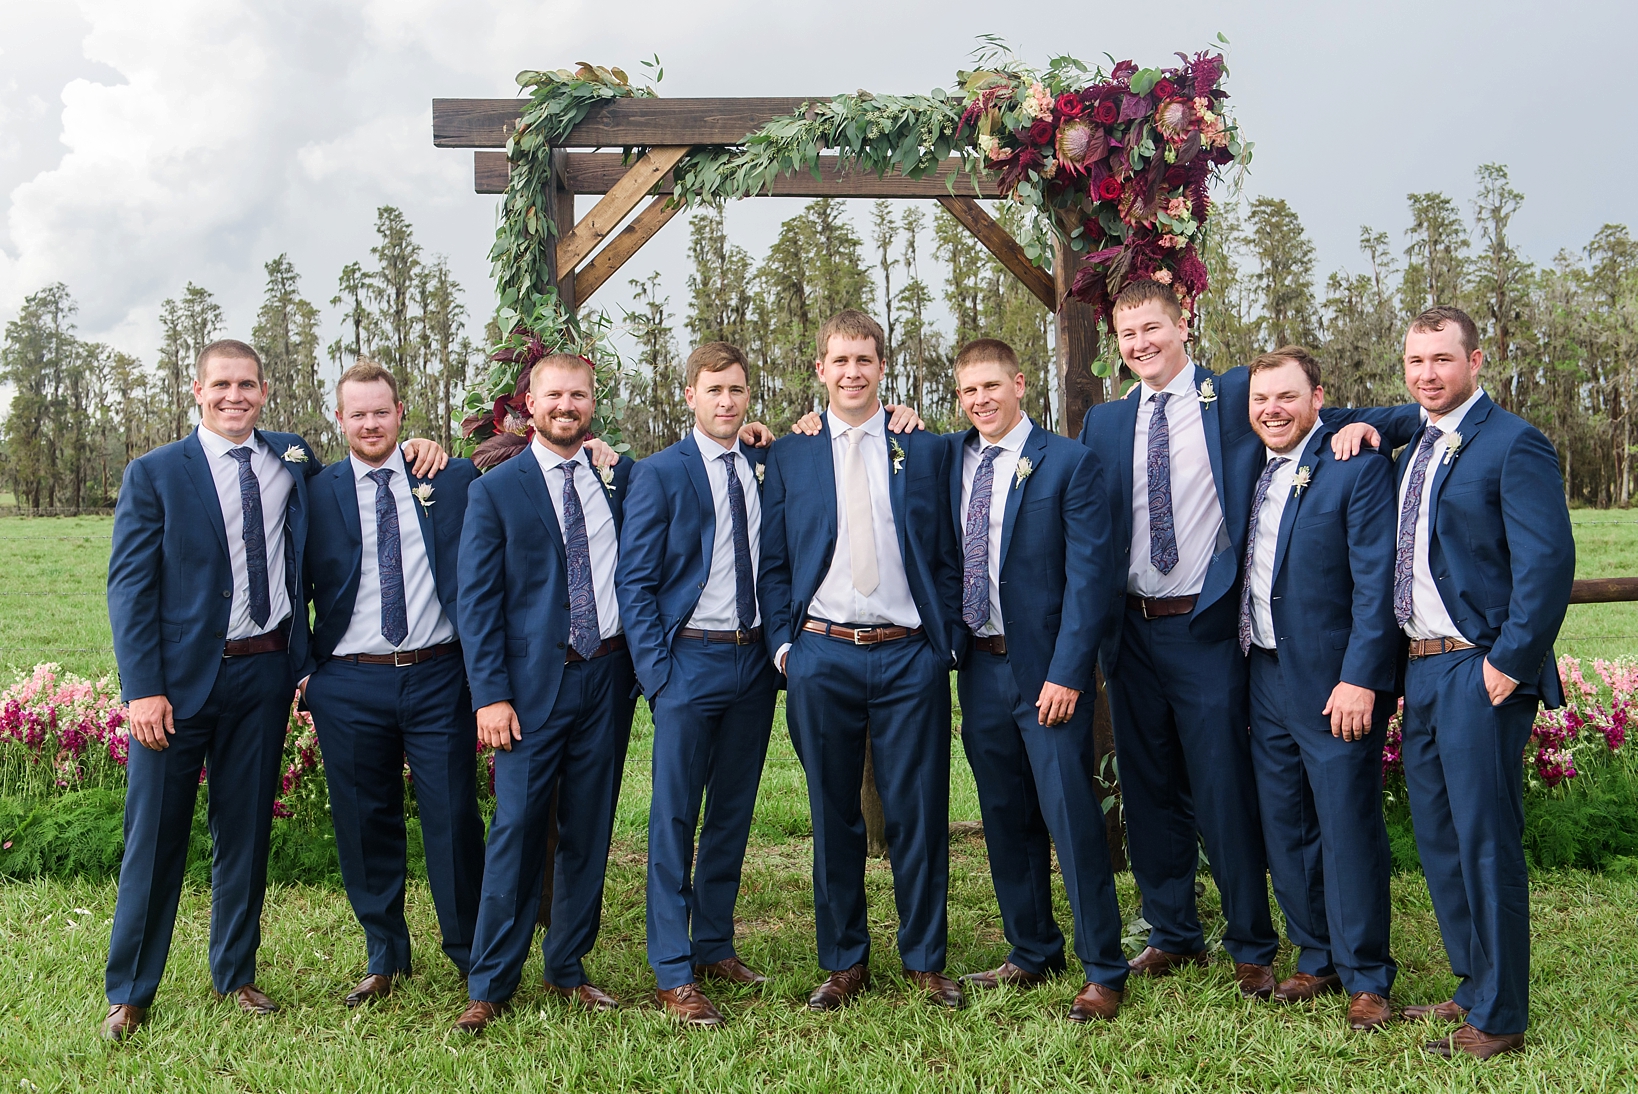 Groom and his groomsmen at the wedding arch